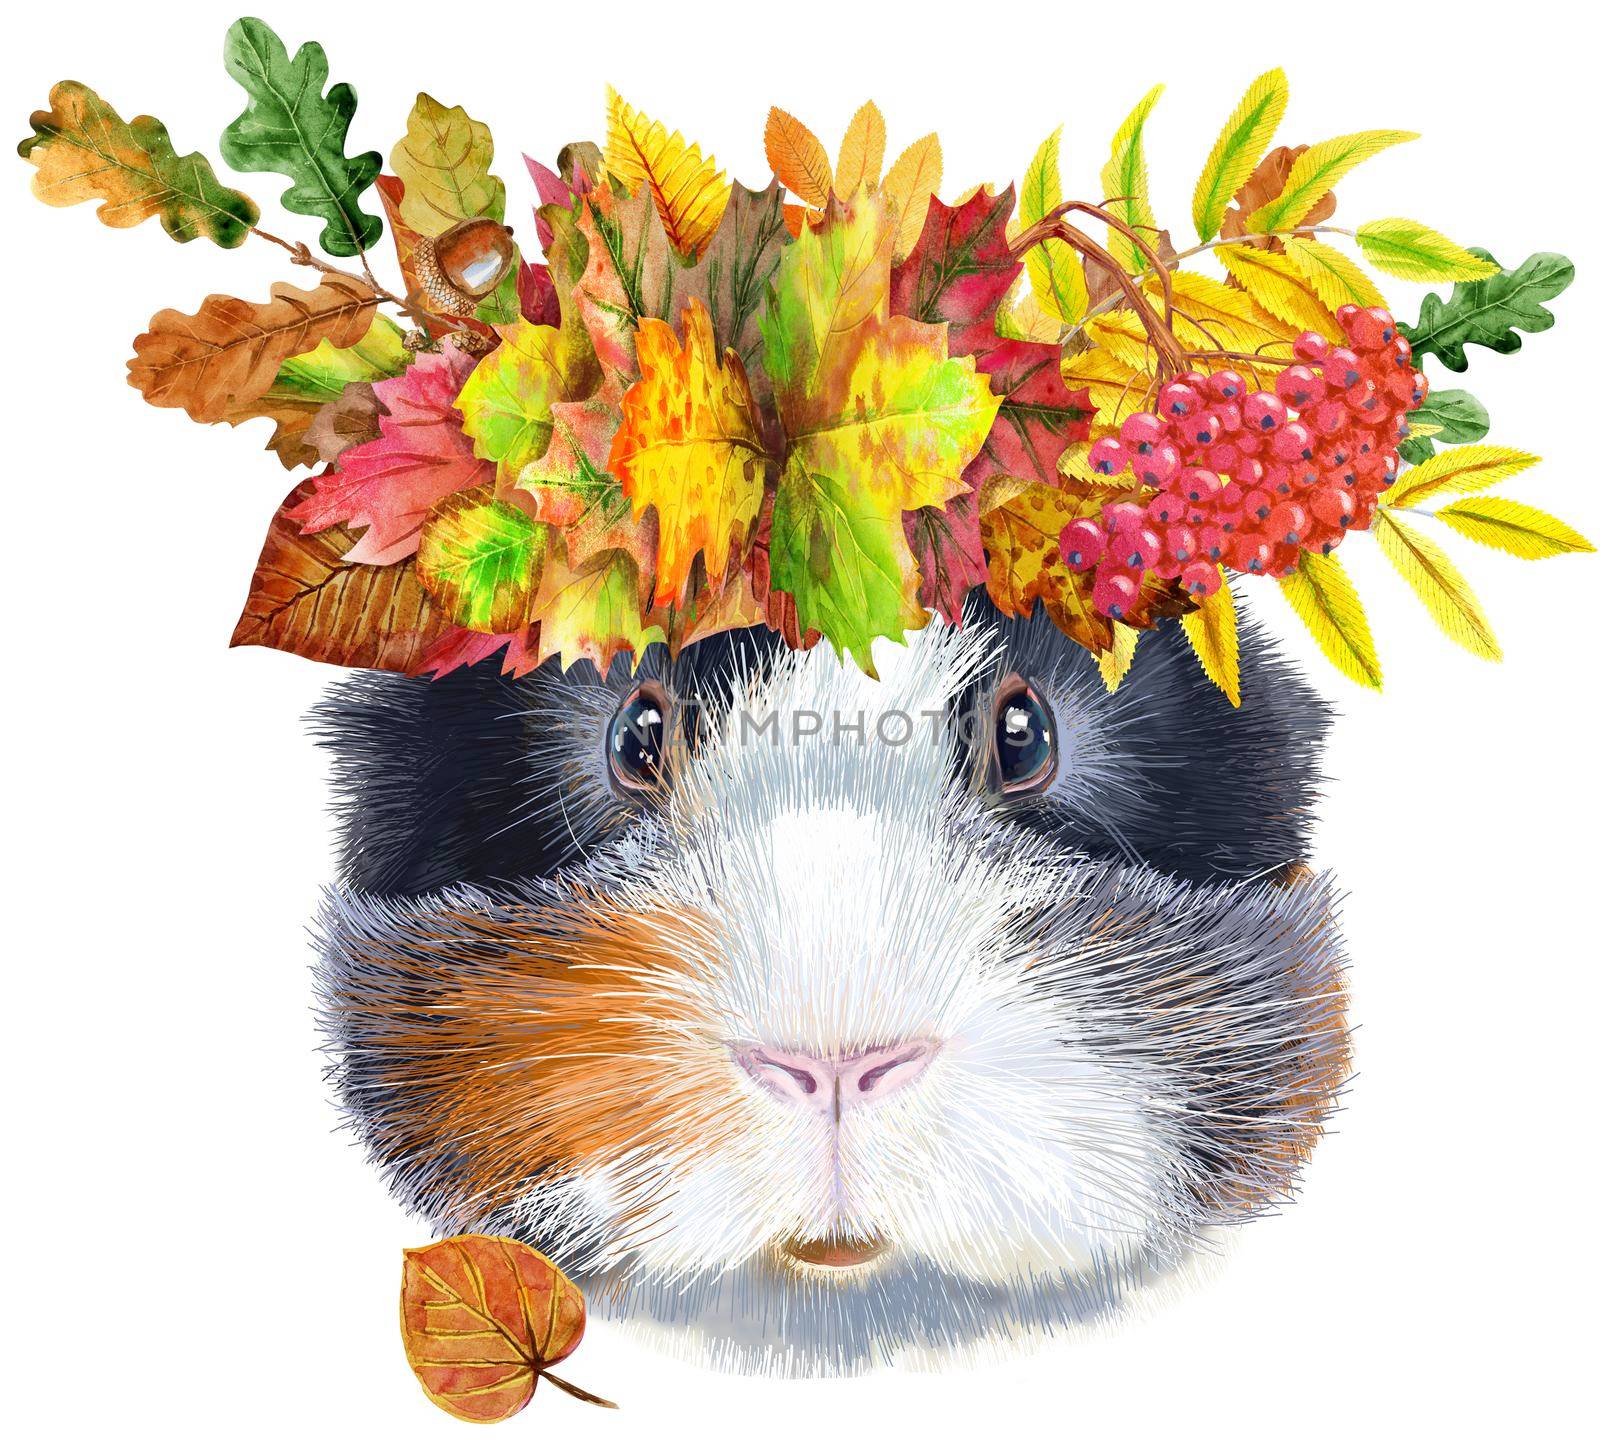 Watercolor portrait of abyssinian guinea pig with wreath of leaves on white background by NataOmsk